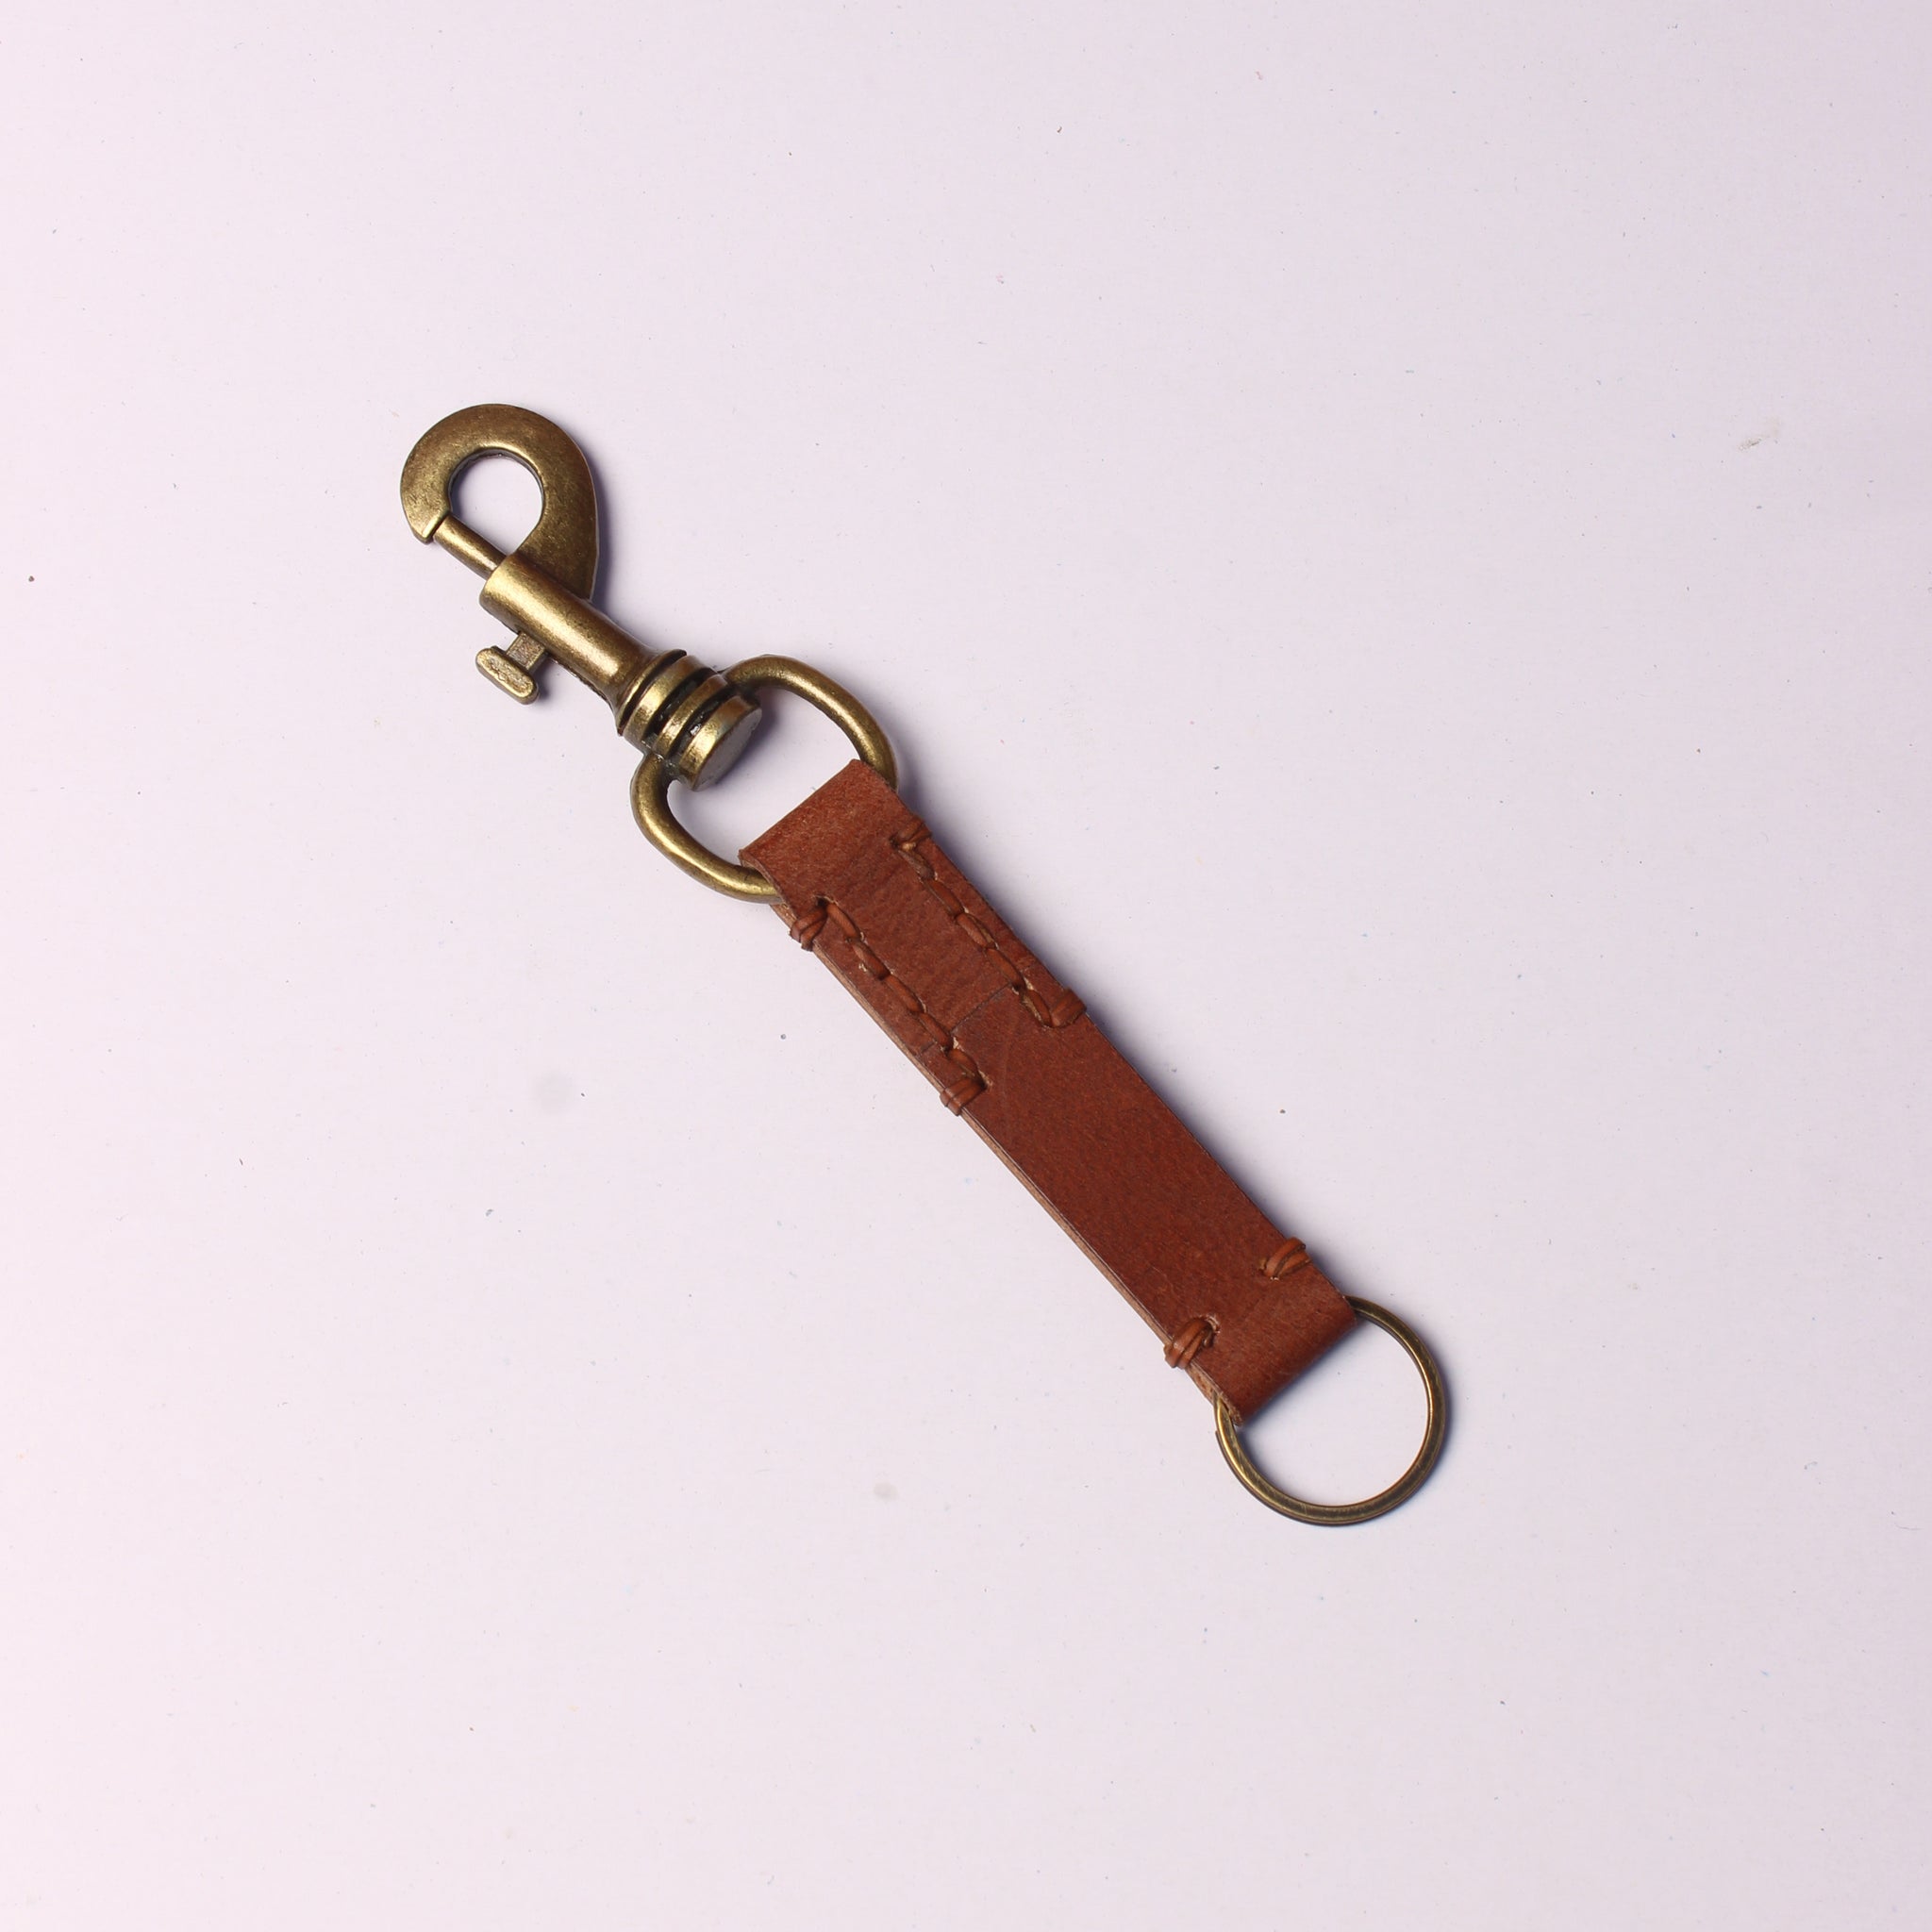 Craftsman's Touch: Genuine Leather Keyring with Elegant Side Stitching